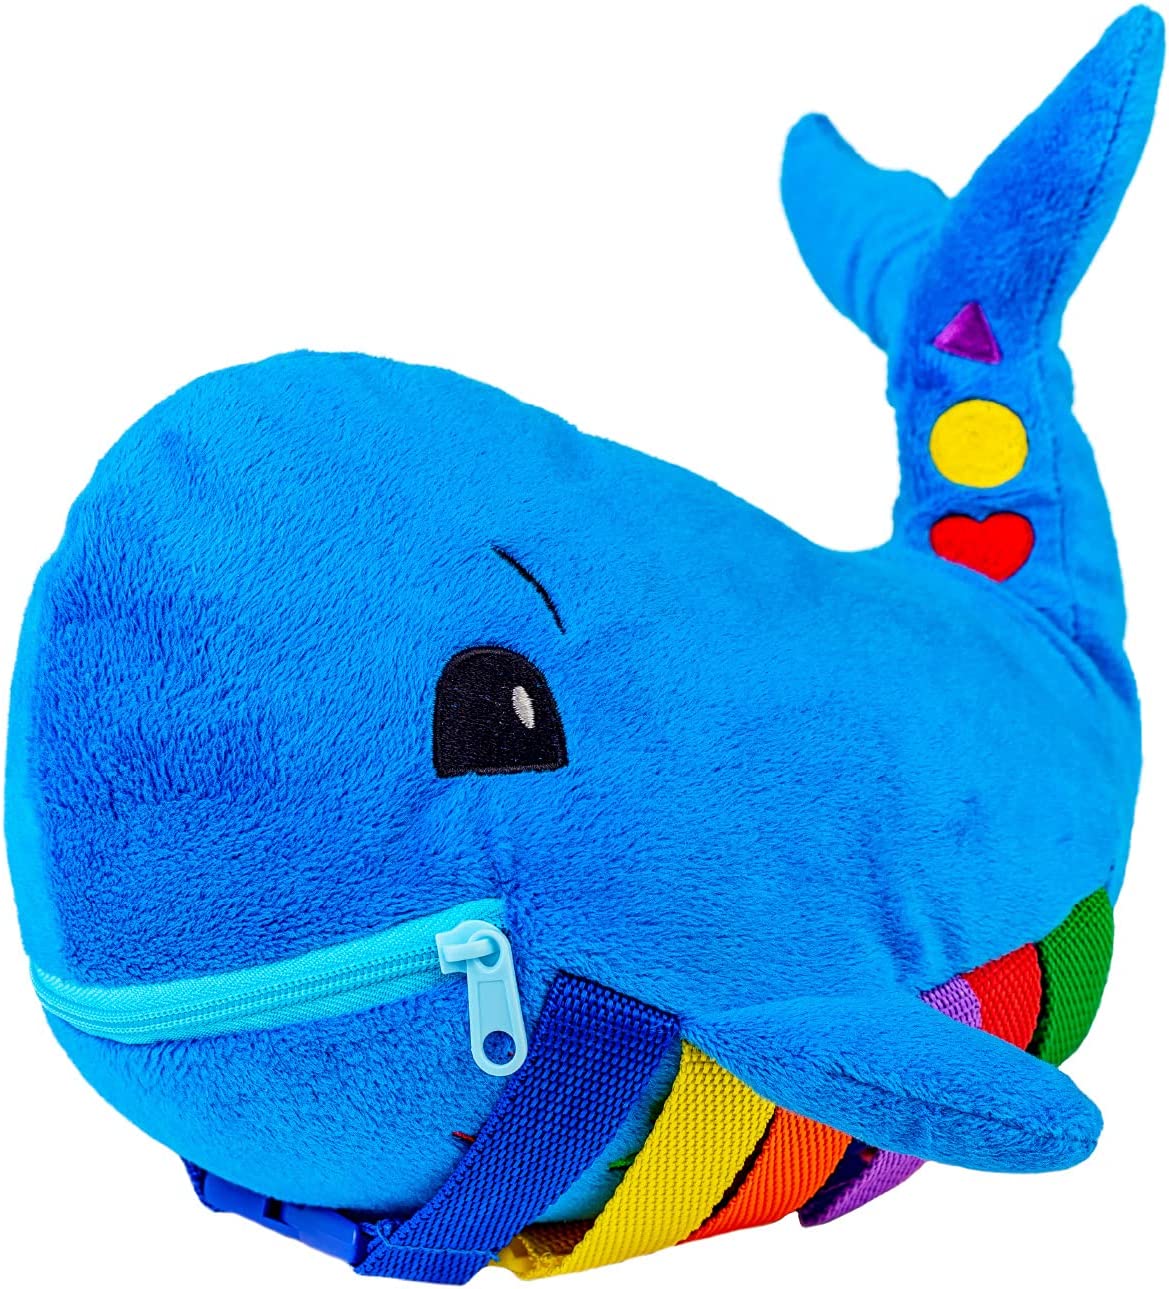 Best toys for 15 month old babies: blue whale